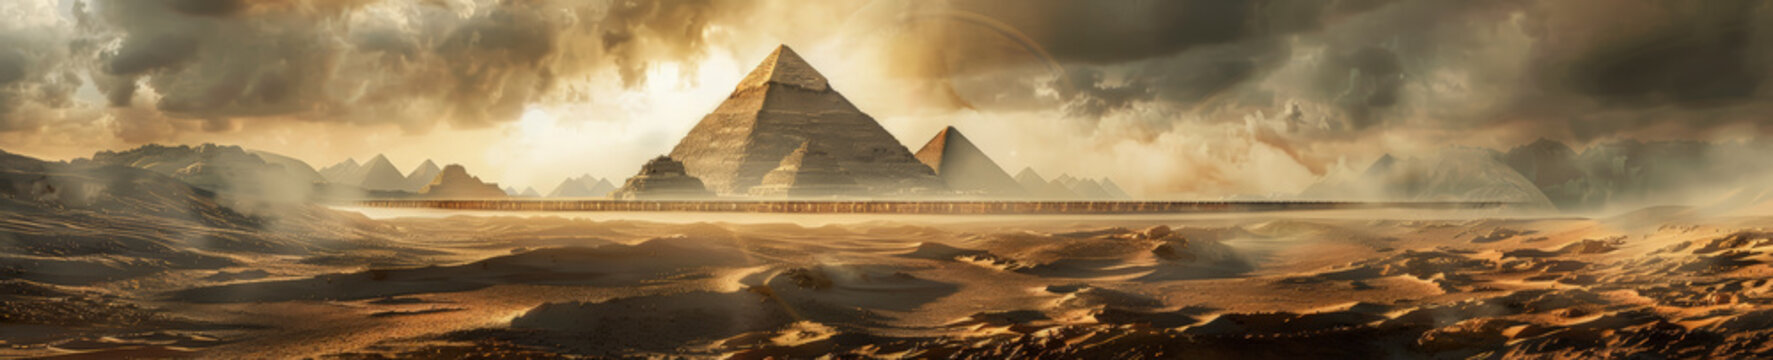 Panorama Egyptian pyramids, panoramic desert and pyramid landscape, background, copy space